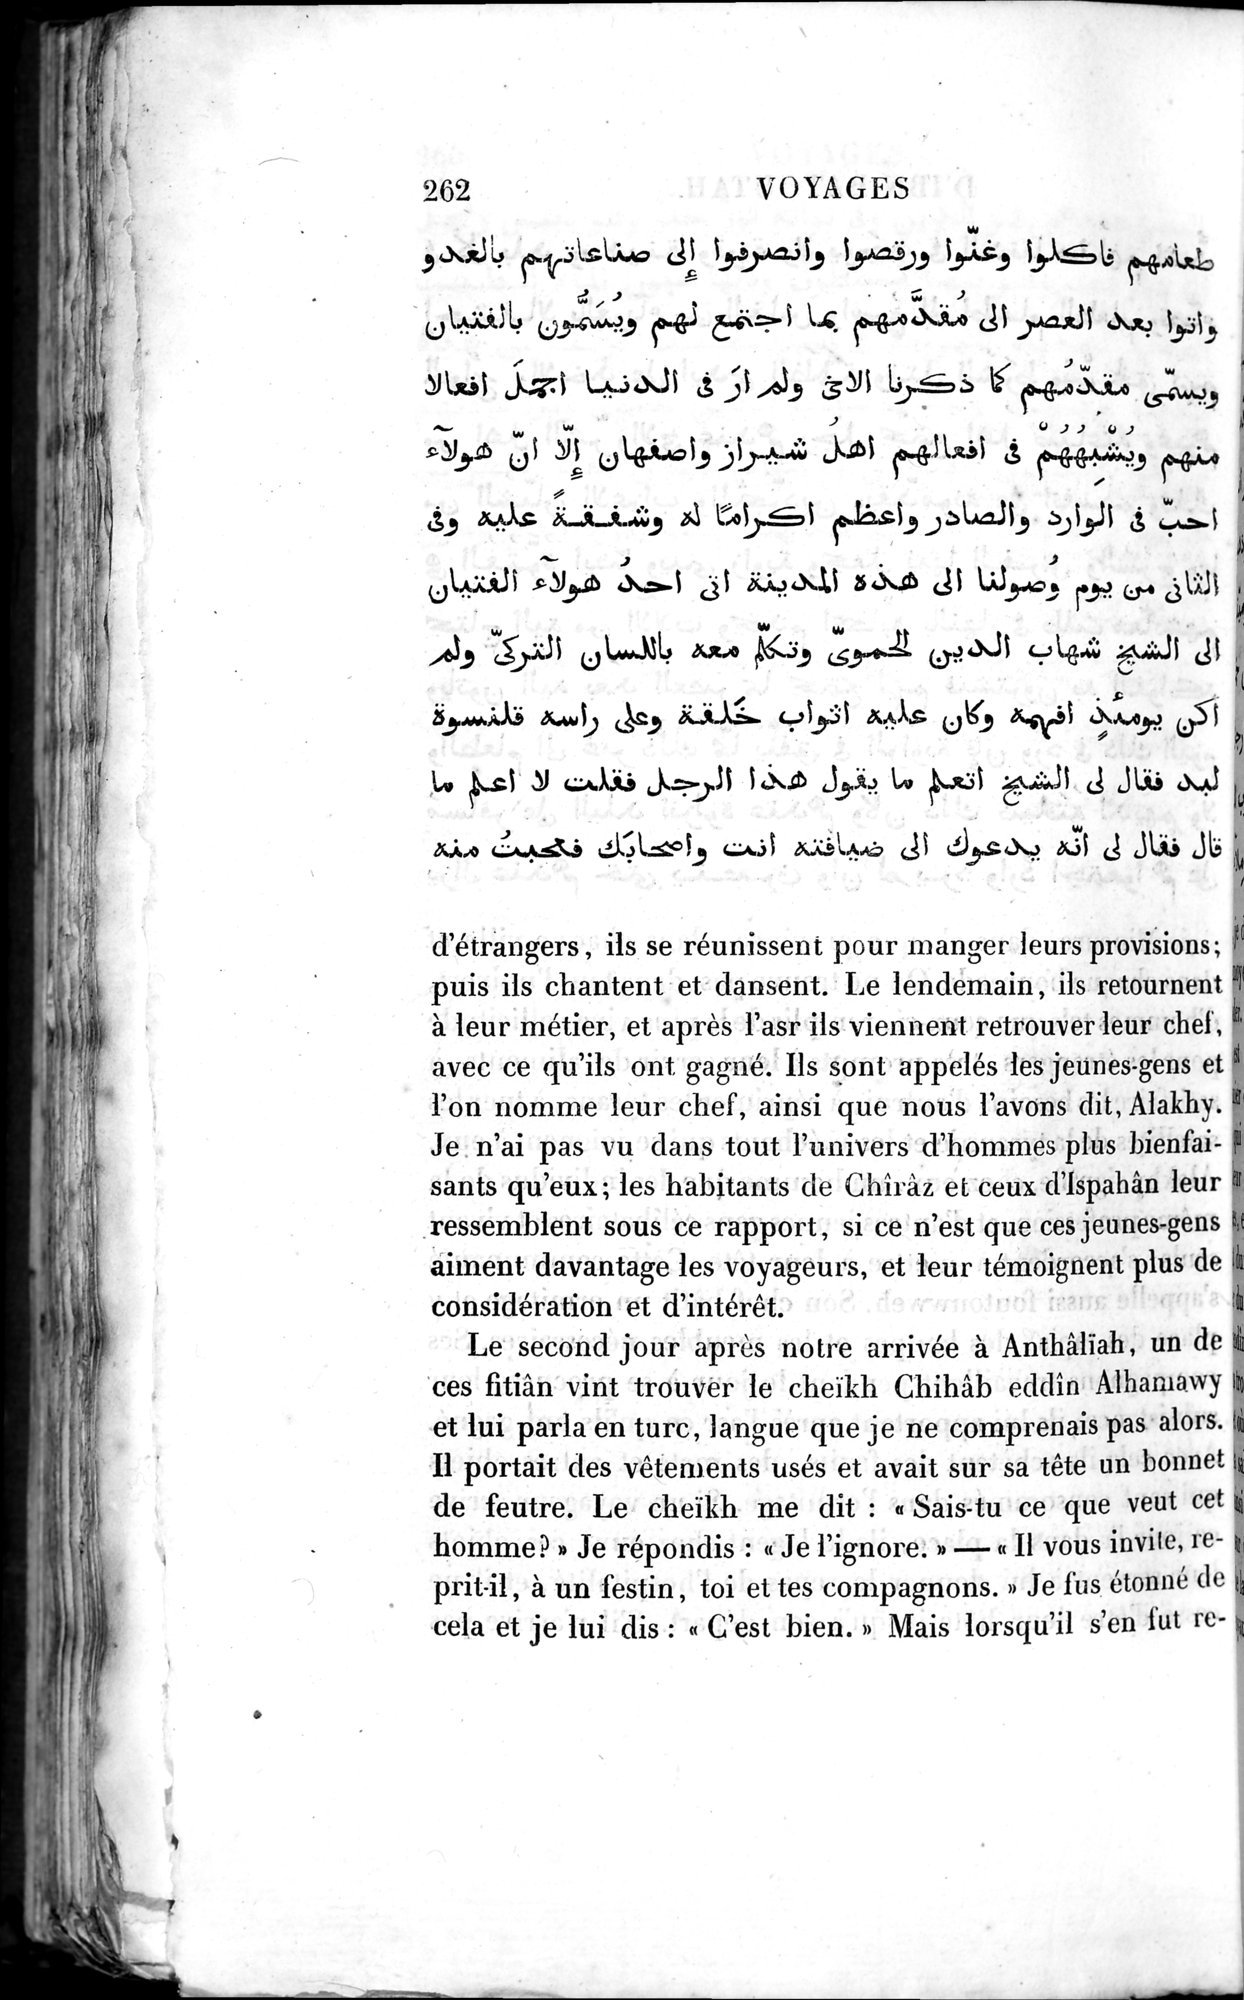 Voyages d'Ibn Batoutah : vol.2 / Page 290 (Grayscale High Resolution Image)